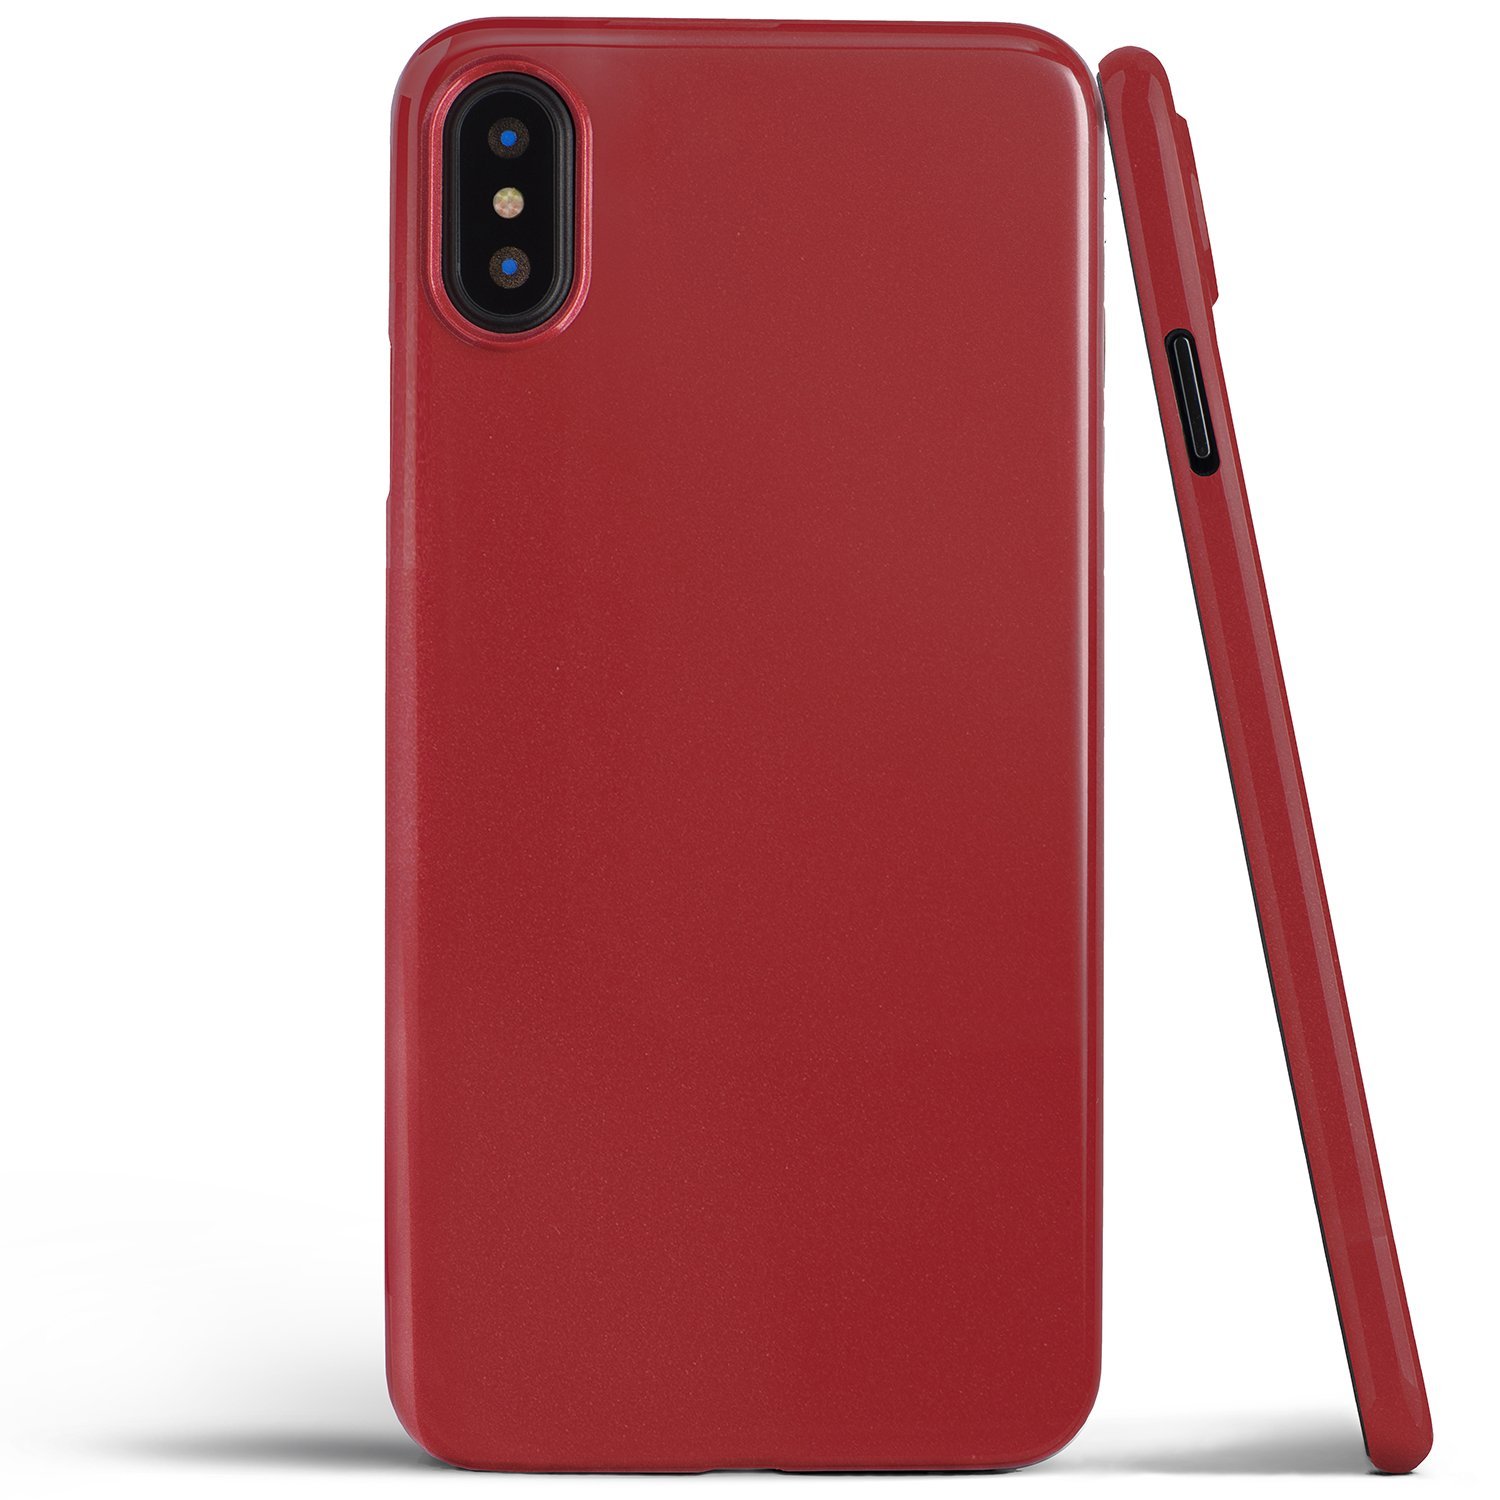 totalle-thin-iphone-x-case